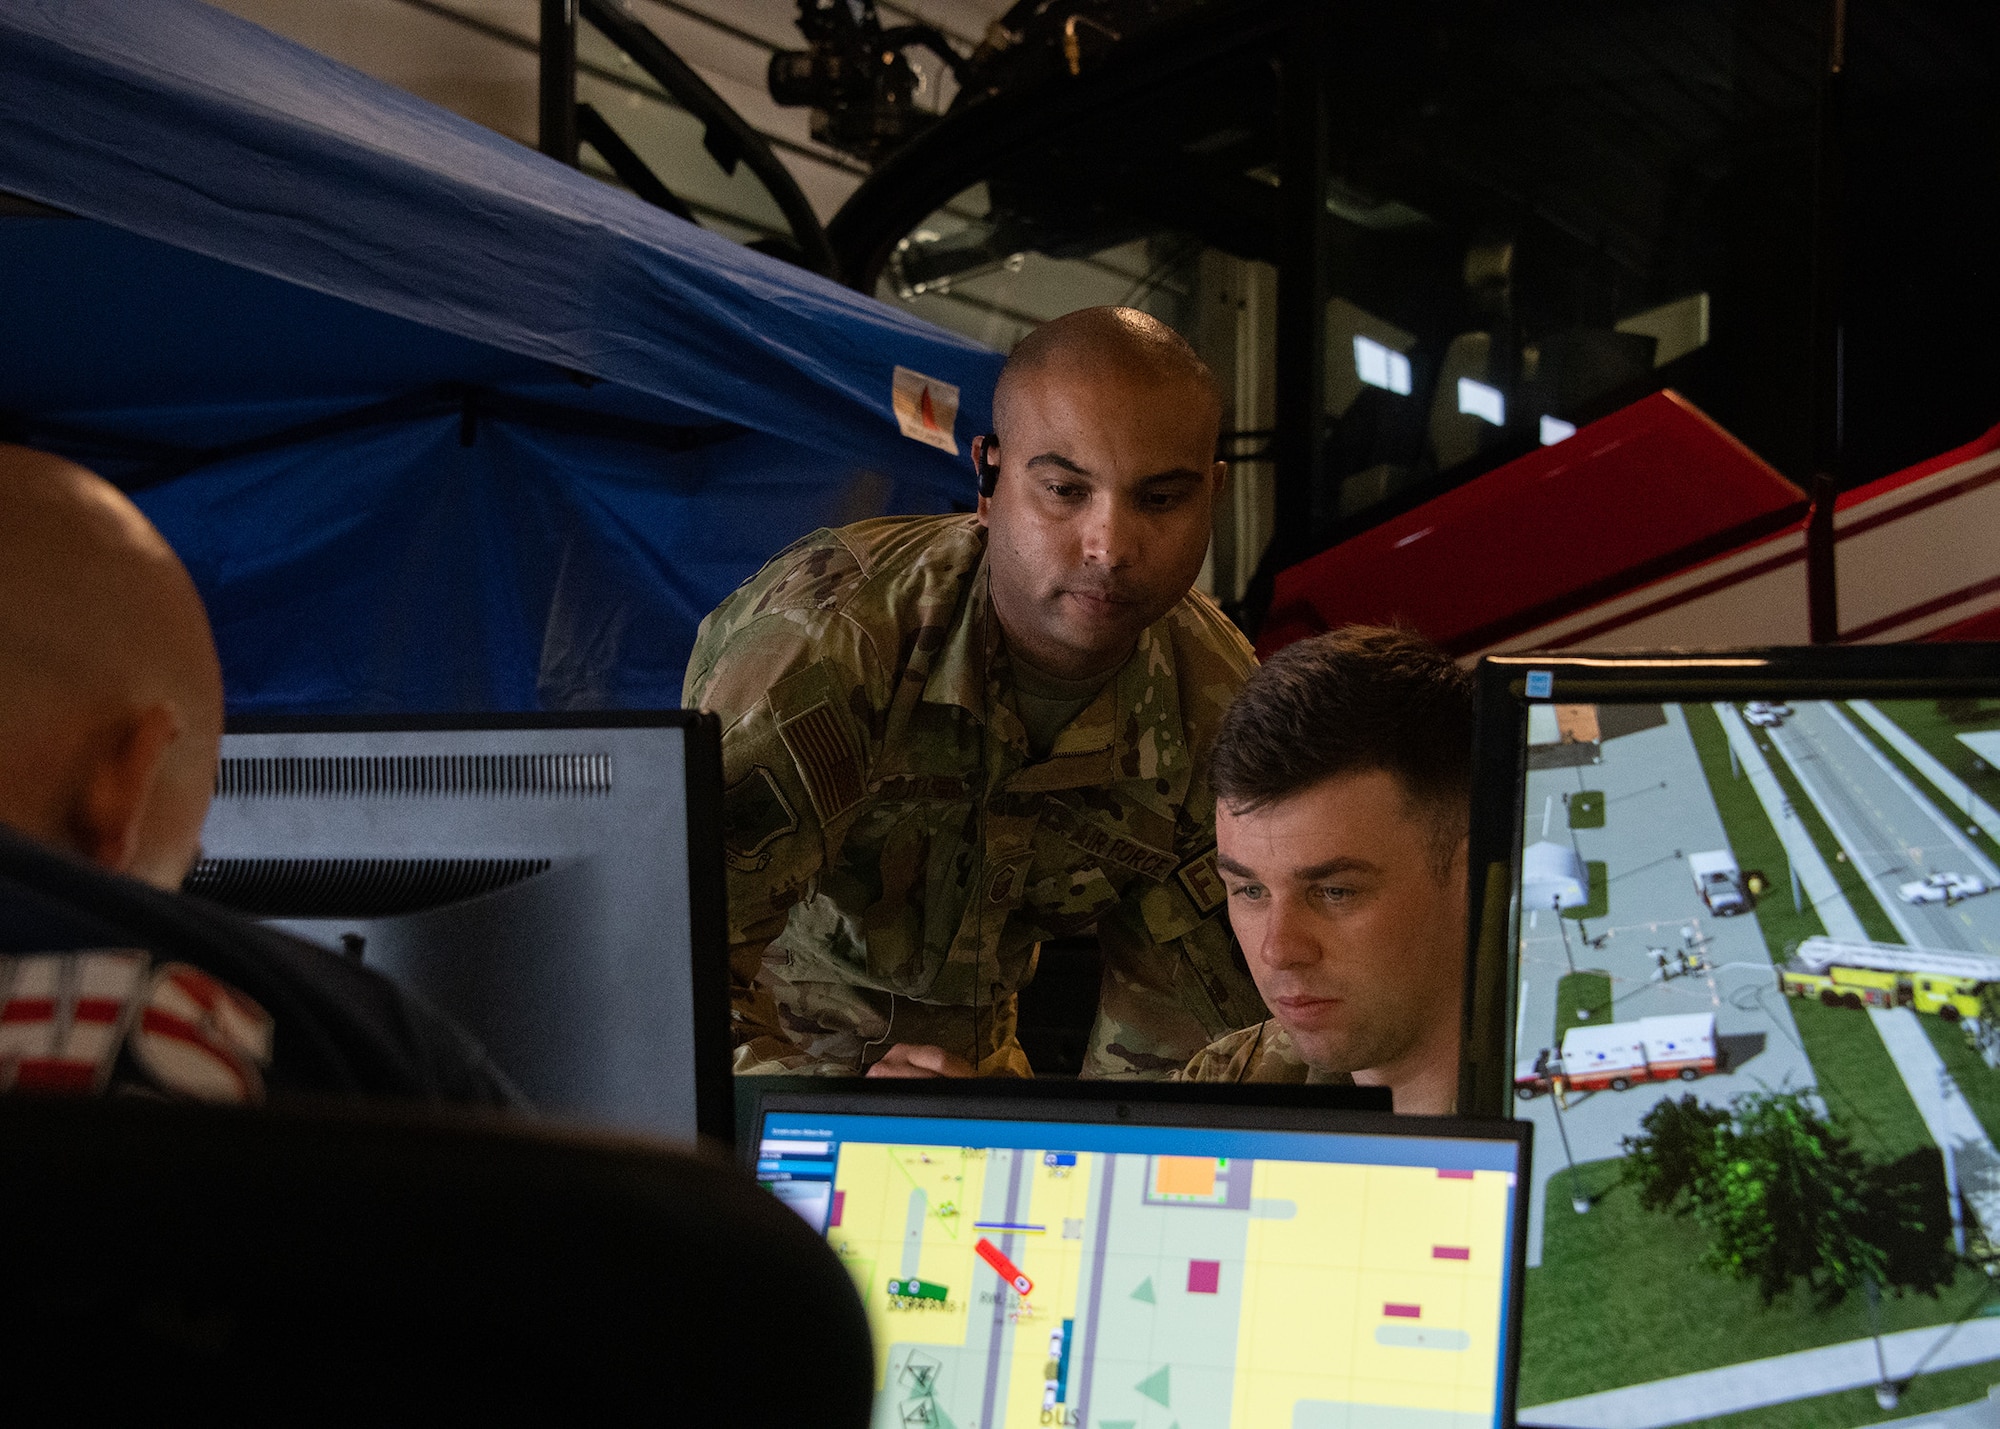 U.S. Air Force Master Sergeant Frank Butler, 316th Wing Inspections superintendent, works with Staff Sergeant William Leuzinger, 316th CES firefighter, on the Advanced Disaster Management Simulator at Joint Base Andrews, Md., Aug. 29, 2023.